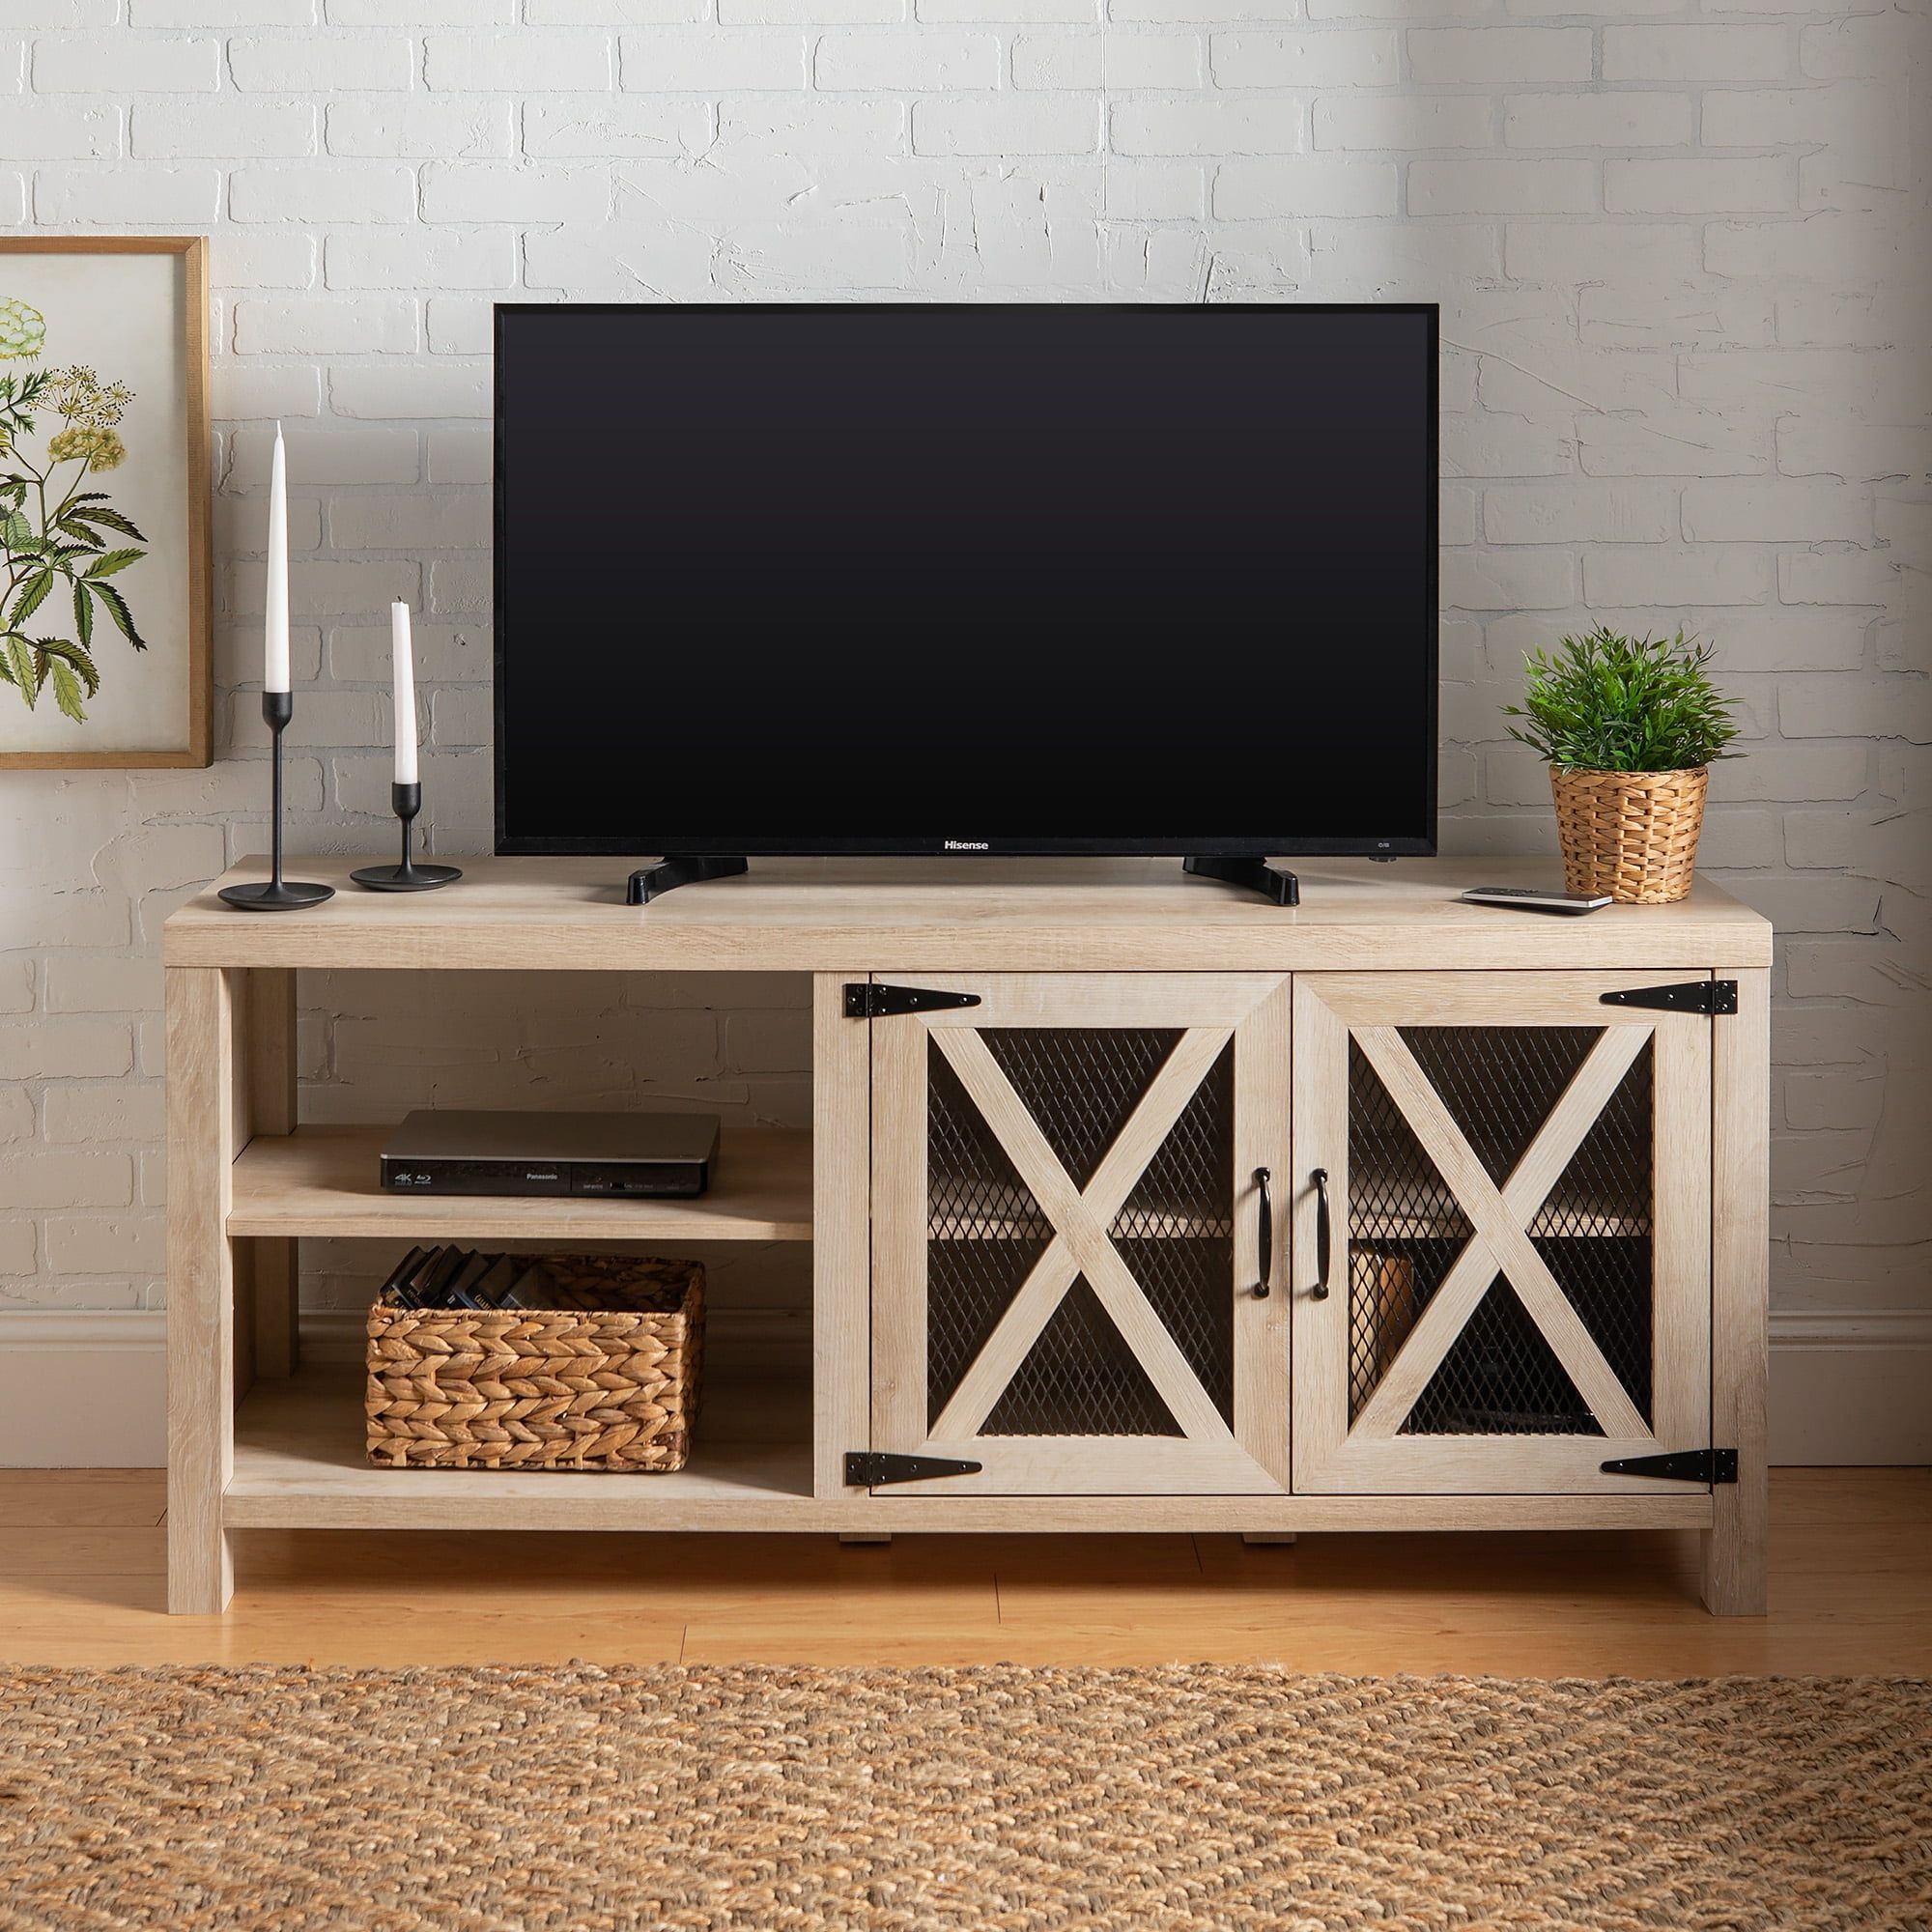 Manor Park Industrial Farmhouse Tv Stand For Tvs Up To 64" – White Oak For Farmhouse Stands For Tvs (Gallery 3 of 20)